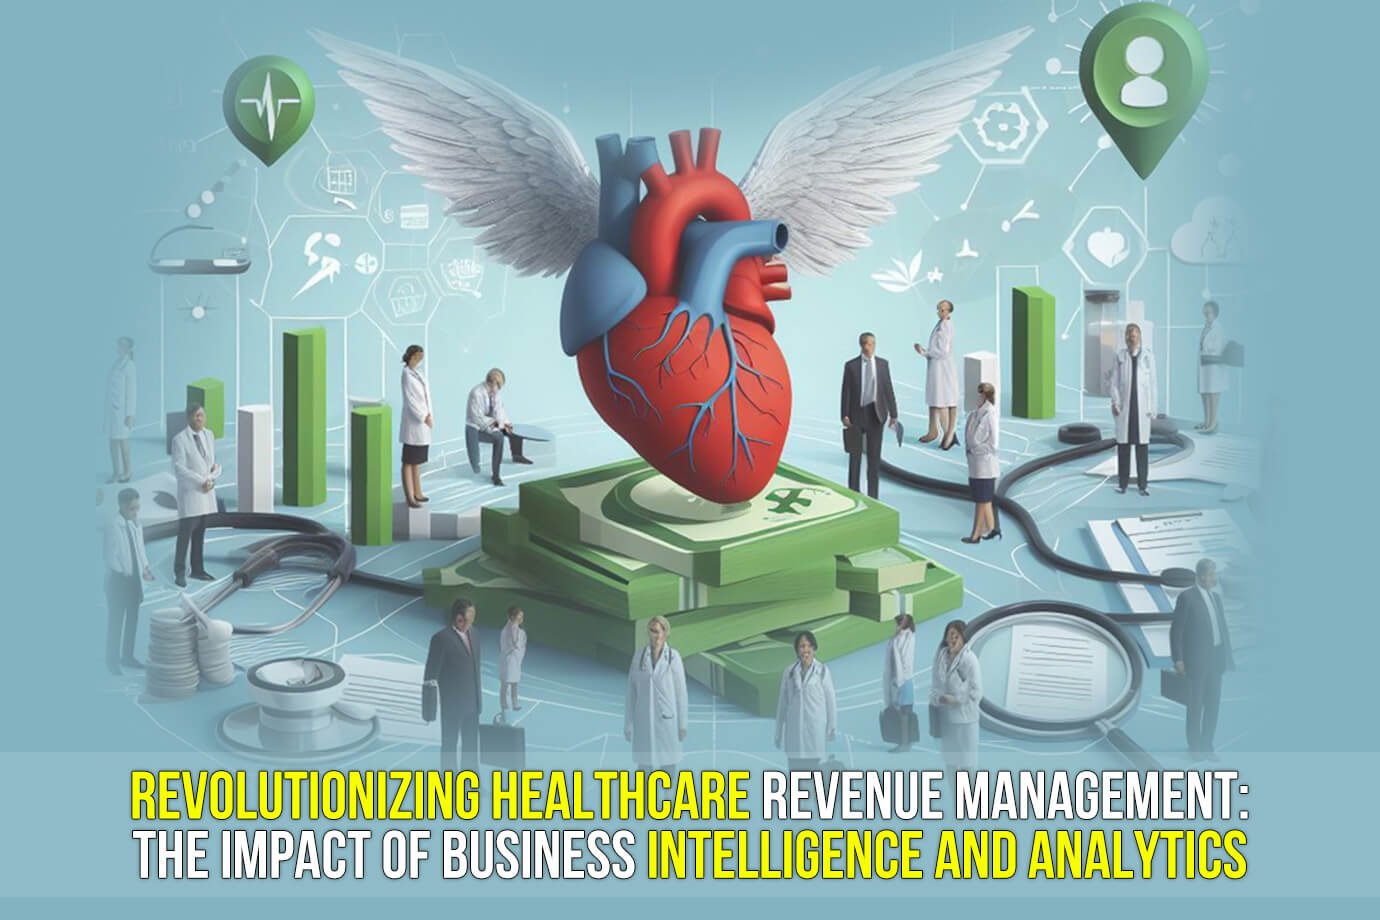 An illustration depicting the revolution in healthcare finances. Vibrant colors, data symbols, and futuristic elements represent the impact of business intelligence and analytics on the industry.